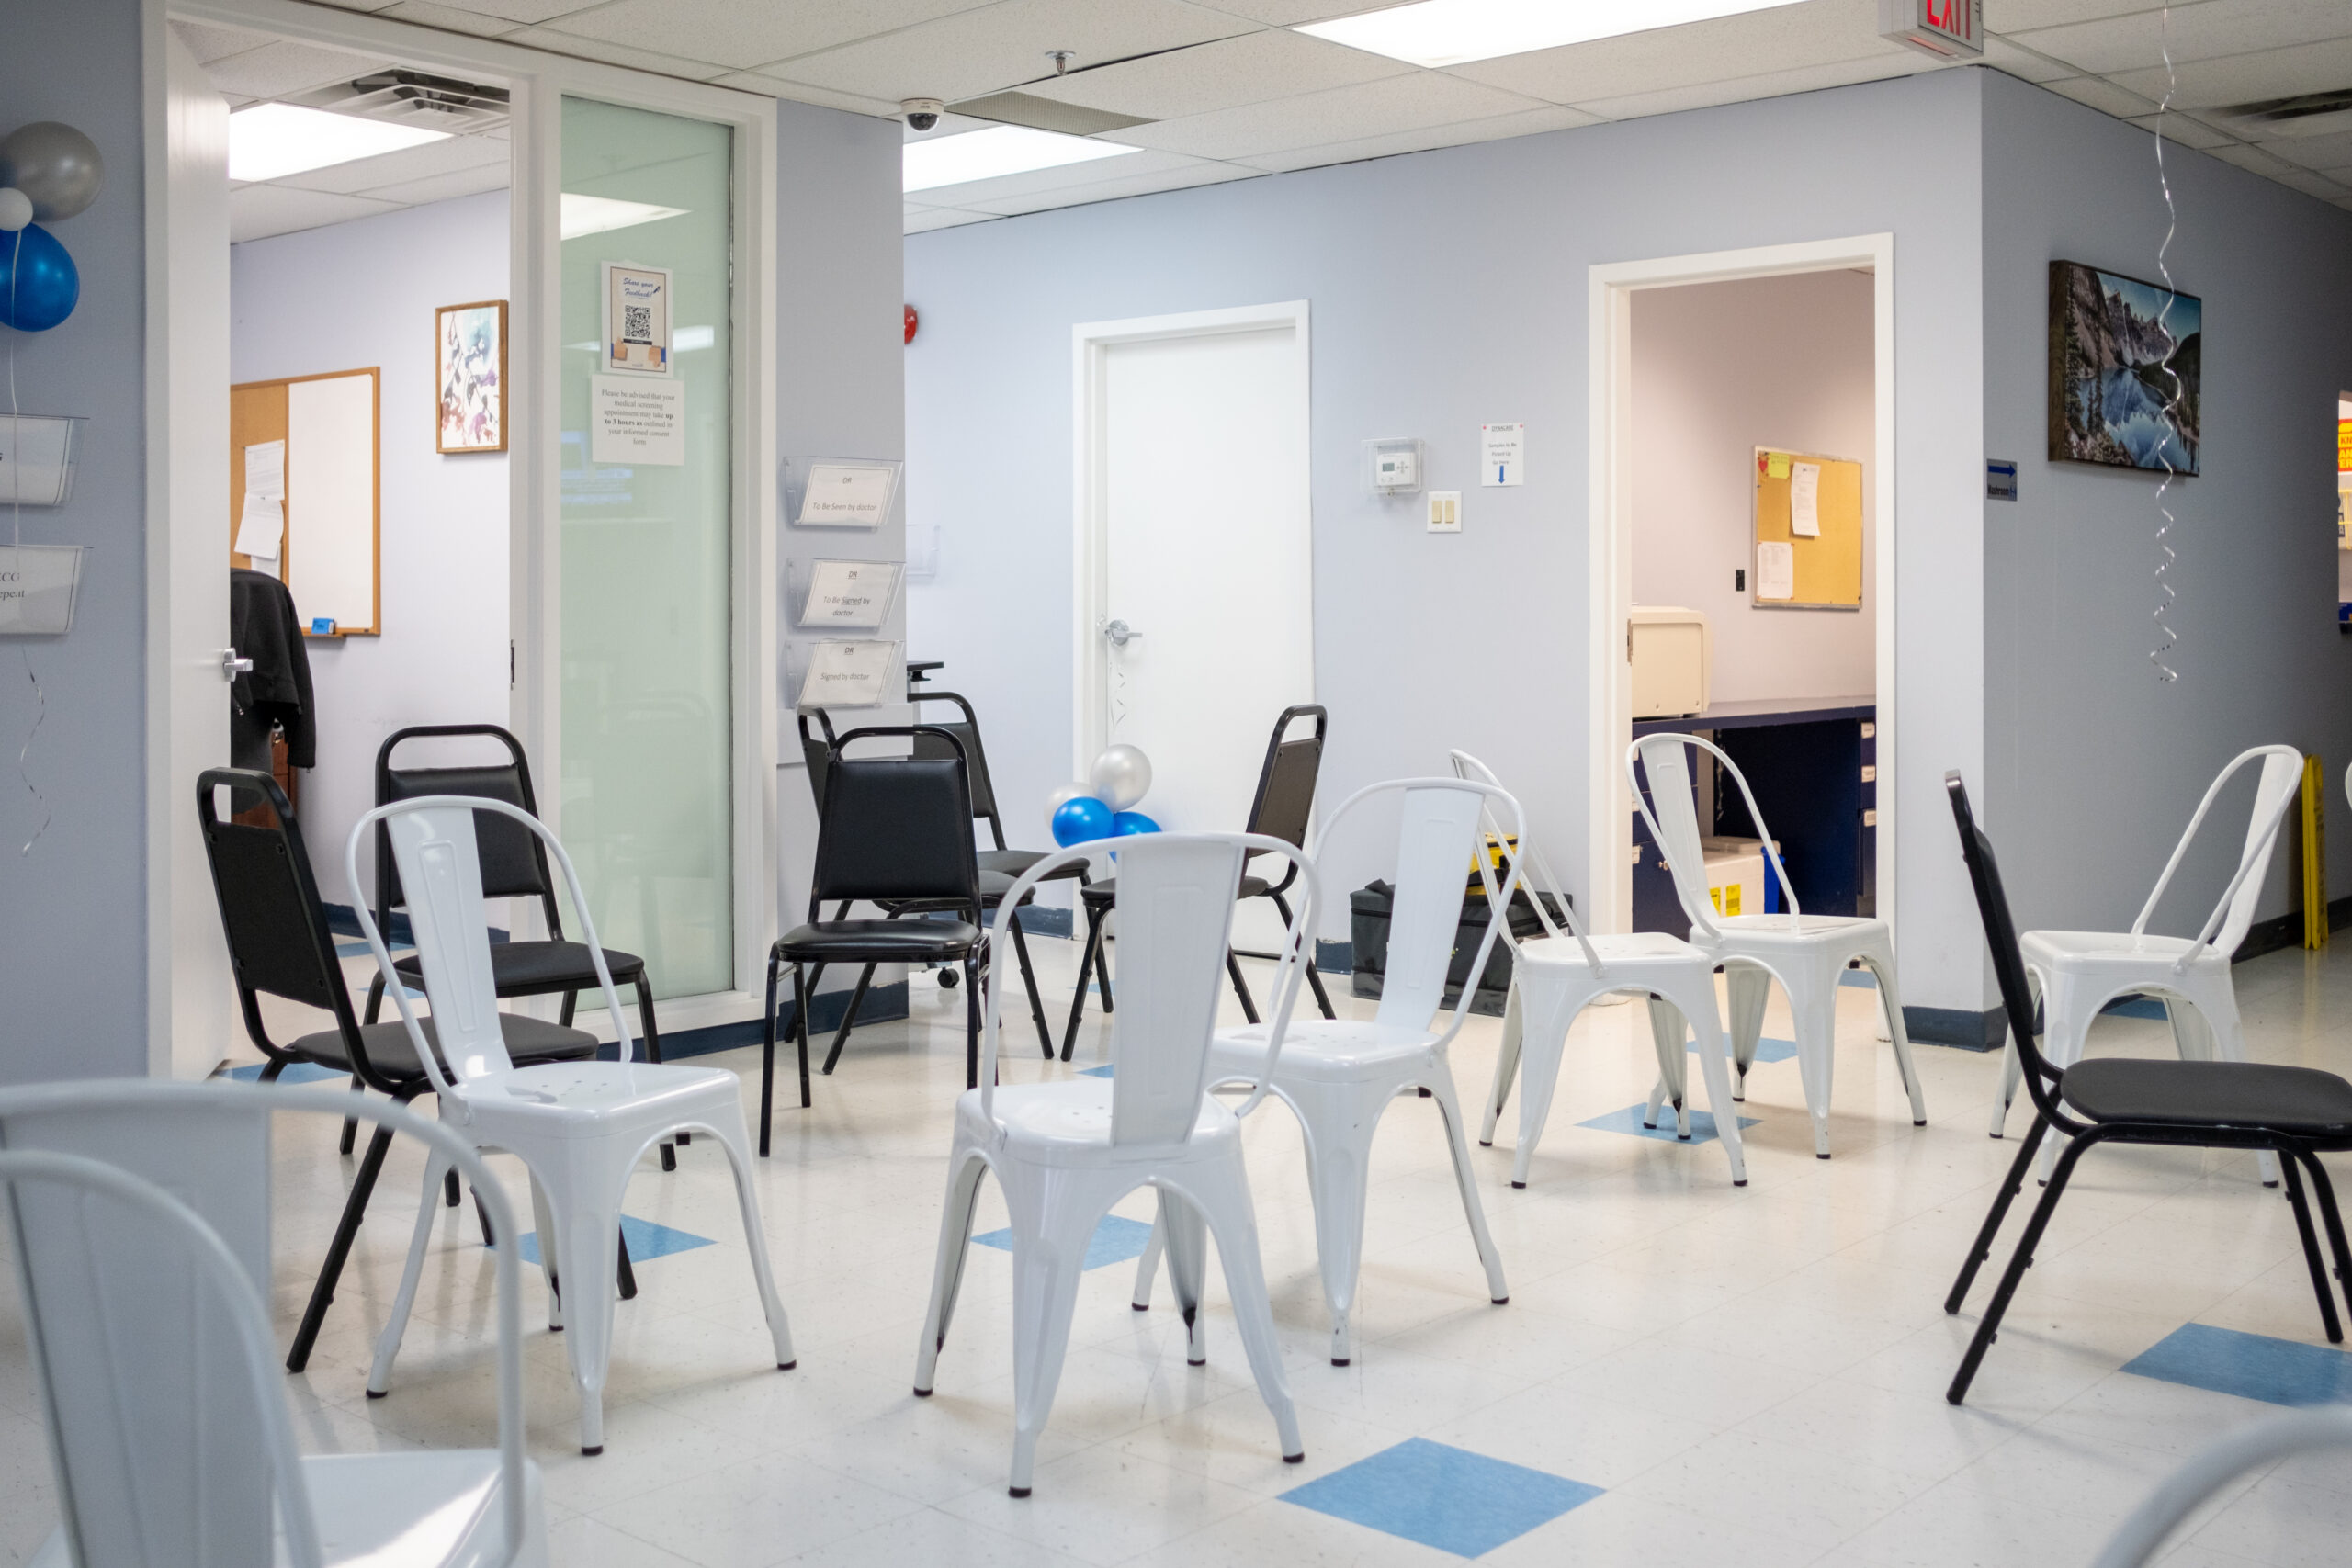 Chairs organized in the clinic